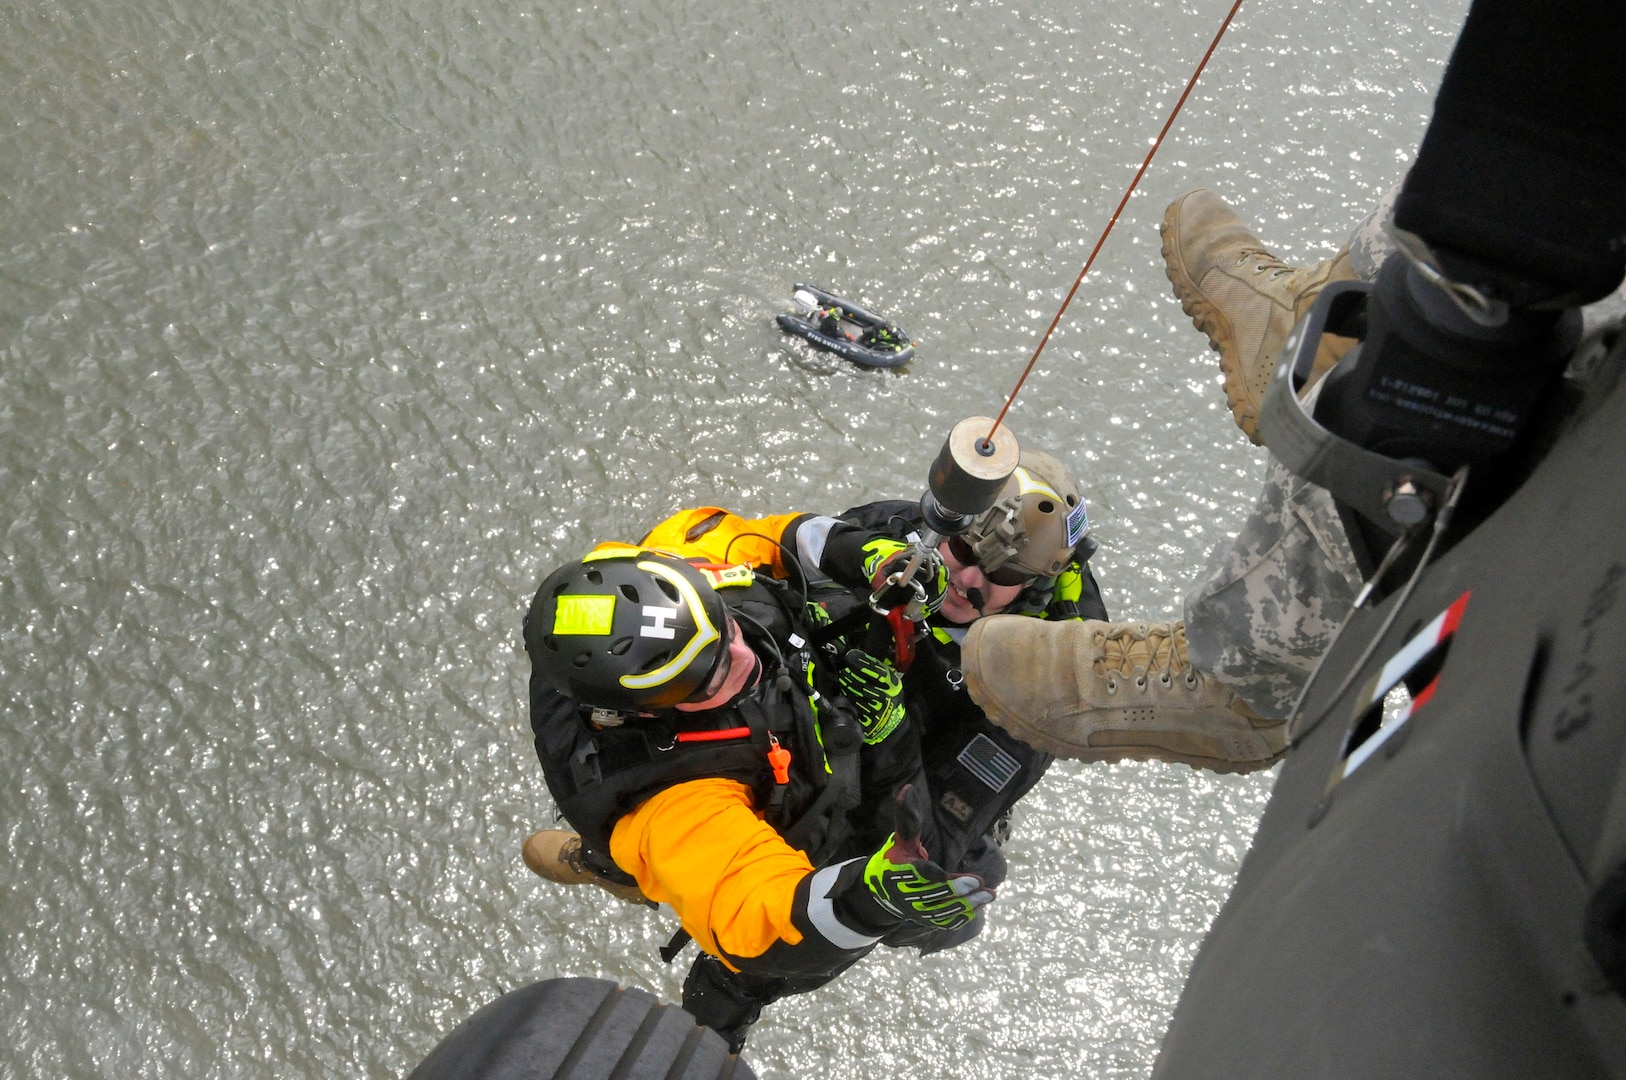 Rescue technicians with the Pennsylvania Helicopter Aquatic Rescue Team train on a hoist during an emergency response exercise in Harrisburg, Pennsylvania, Aug. 15, 2019. 28th ECAB Soldiers worked with their partners in PA-HART and other civilian first responders during the exercise, named “Operation Hurricane.” PA-HART is a joint partnership between the Pennsylvania National Guard, Pennsylvania Fish and Boat Commission, Pennsylvania Emergency Management Agency and certified civilian rescue technicians. It is an aerial search and rescue team, able to assist citizens during disasters.